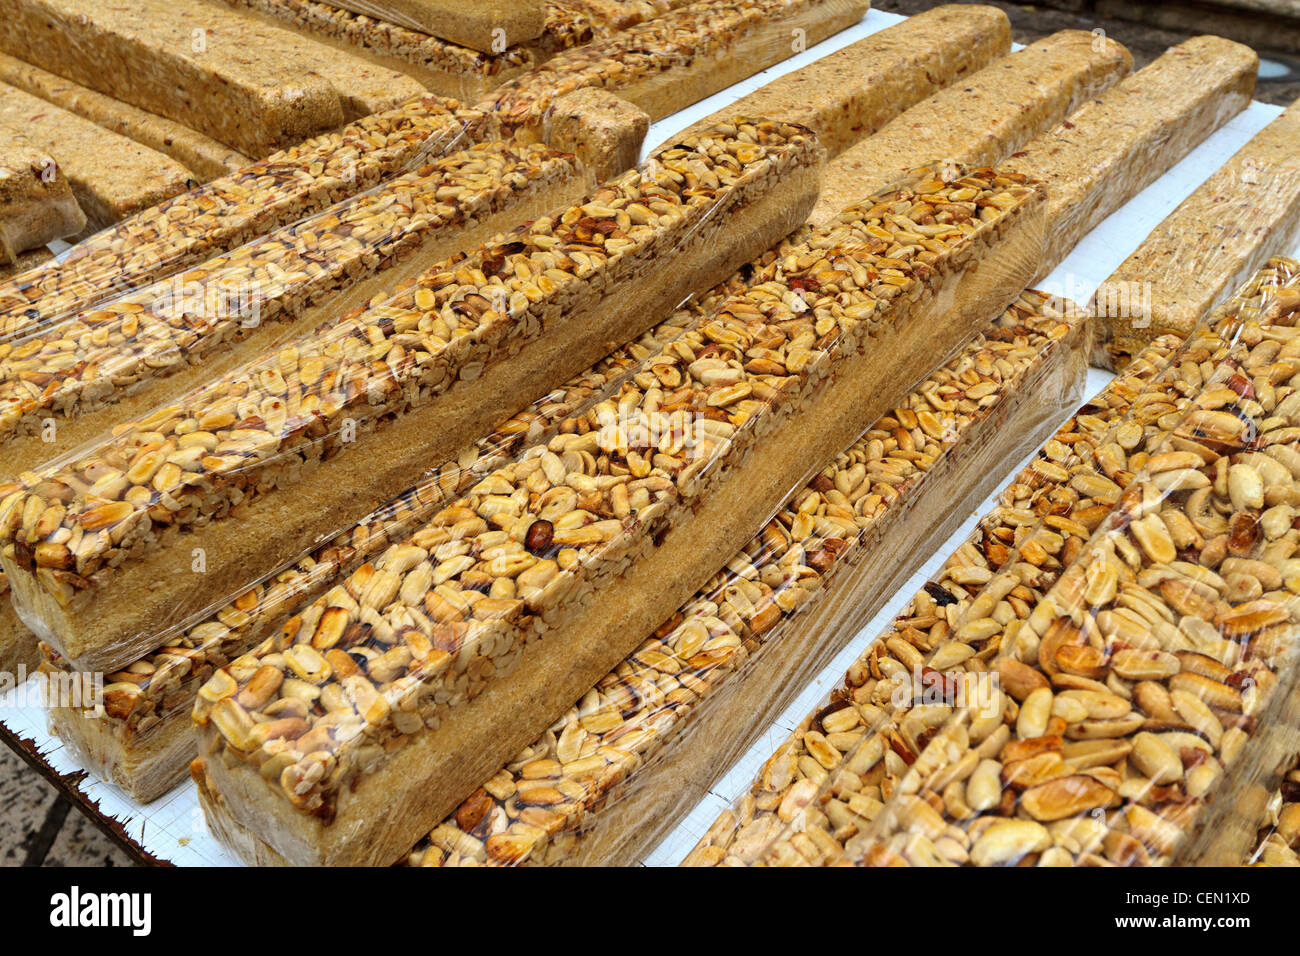 Halvah, a very sweet Middle Eastern dessert made of sesame seed paste, here topped with nuts. Stock Photo